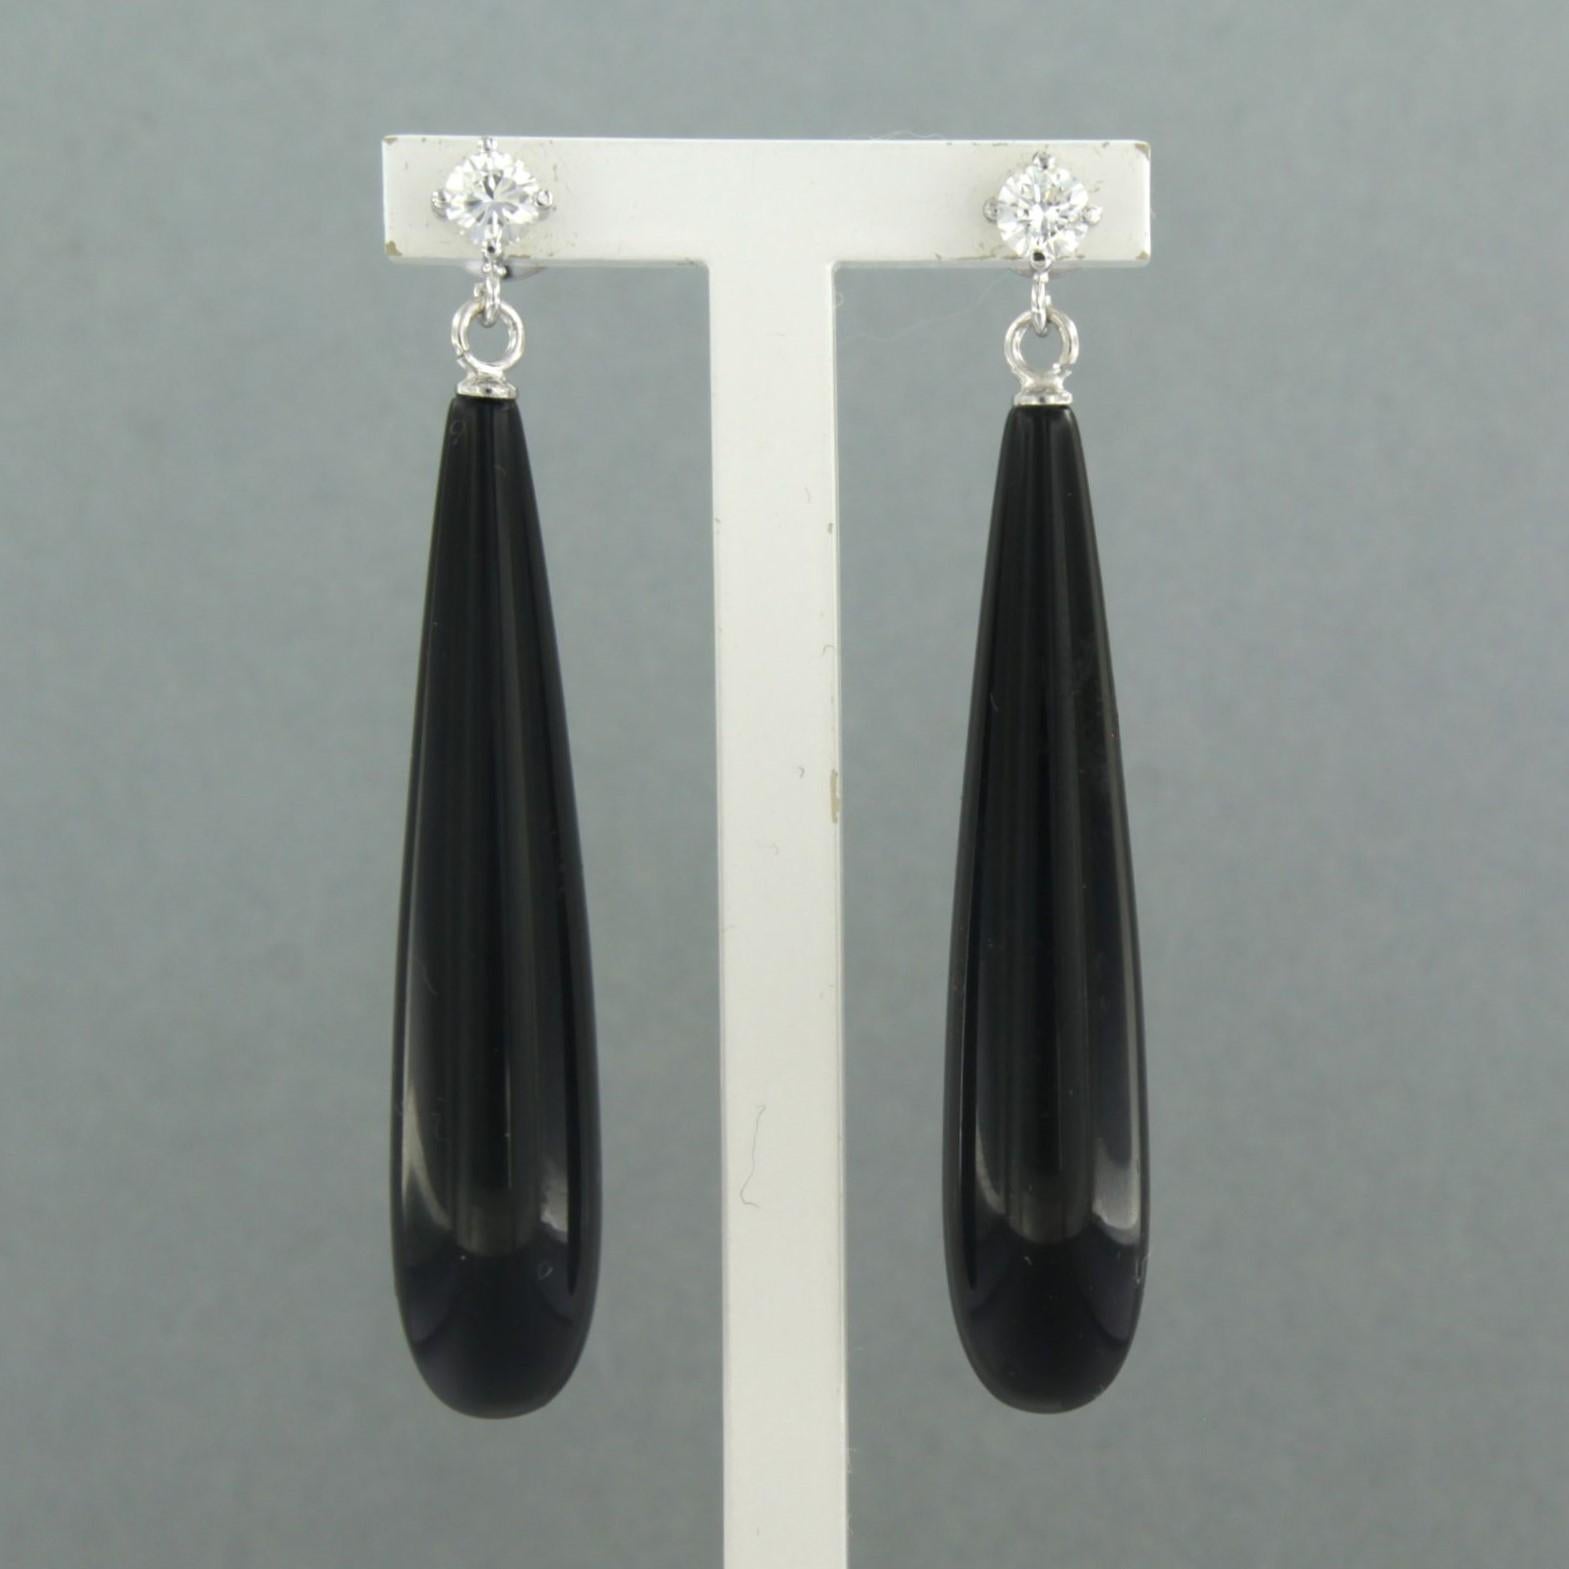 18k white gold earrings with onyx and brilliant cut diamonds. 0.38ct - F/G – VS/SI

Detailed description:

the size of the earrings is 5.0 cm long by 8.3 mm wide

Total weight 8.7 grams

set with

- 2 x 4.0 cm x 8.3 mm drop shape cut onyx

colour